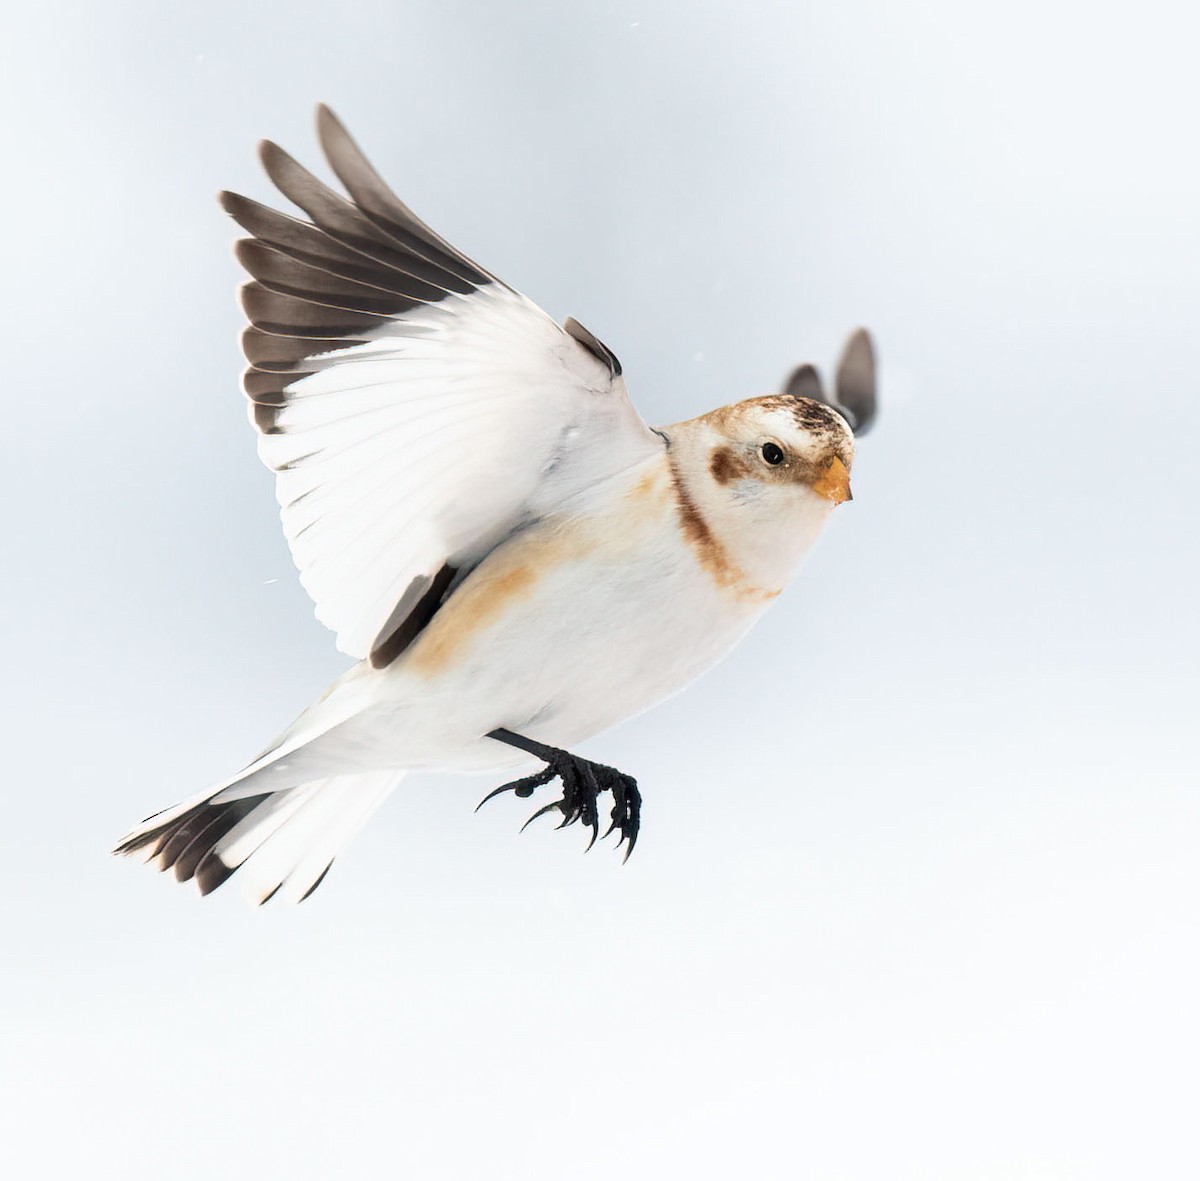 Snow Bunting - Anne-Marie Dufour